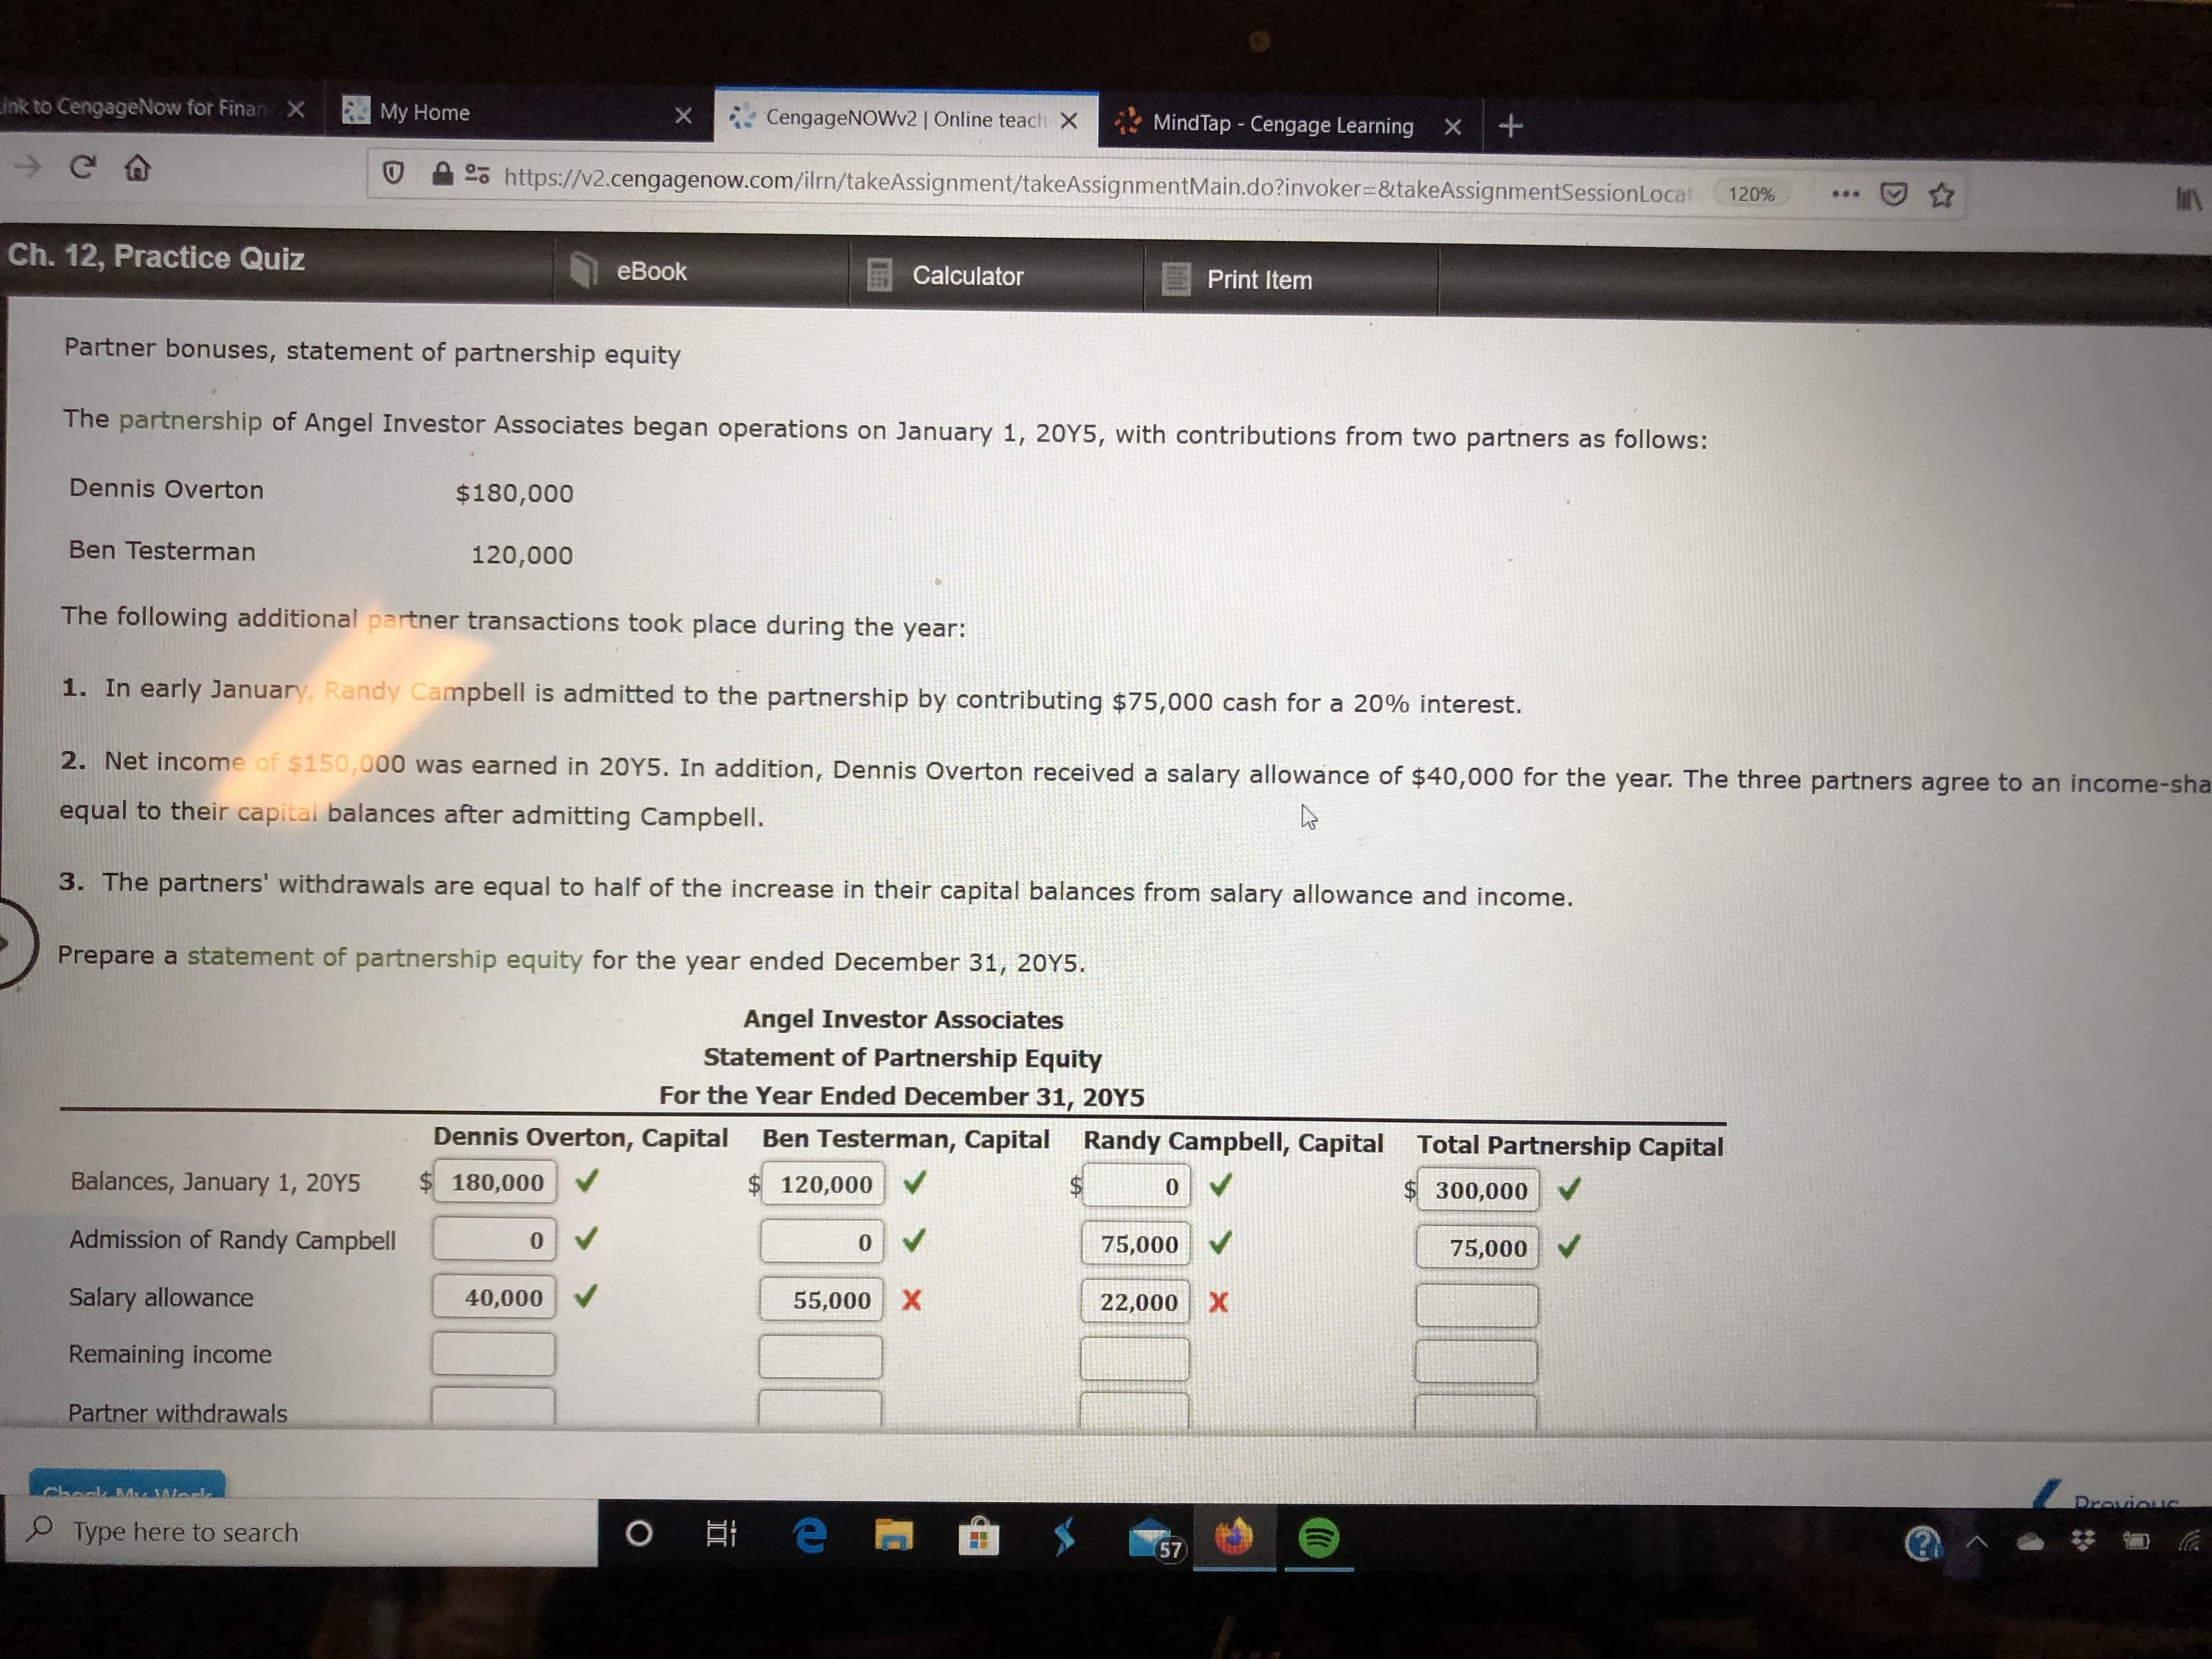 Link to CengageNow for FinanX
My Home
CengageNOWv2 | Online teach X
MindTap - Cengage Learning X
25 https://v2.cengagenow.com/ilrn/takeAssignment/takeAssignmentMain.do?invoker=&takeAssignmentSessionLocat
120%
Ch. 12, Practice Quiz
eBook
Calculator
Print Item
Partner bonuses, statement of partnership equity
The partnership of Angel Investor Associates began operations on January 1, 20Y5, with contributions from two partners as follows:
Dennis Overton
$180,000
Ben Testerman
120,000
The following additional partner transactions took place during the year:
1. In early January, Randy Campbell is admitted to the partnership by contributing $75,000 cash for a 20% interest.
2. Net income of $150,000 was earned in 20Y5. In addition, Dennis Overton received a salary allowance of $40,000 for the year. The three partners agree to an income-sha
equal to their capital balances after admitting CampbellI.
3. The partners' withdrawals are equal to half of the increase in their capital balances from salary allowance and income.
Prepare a statement of partnership equity for the year ended December 31, 20Y5.
Angel Investor Associates
Statement of Partnership Equity
For the Year Ended December 31, 20Y5
Dennis Overton, Capital Ben Testerman, Capital Randy Campbell, Capital Total Partnership Capital
Balances, January 1, 20Y5
$ 180,000
$120,000
24
$300,000
Admission of Randy Campbell
75,000 V
75,000
Salary allowance
40,000
55,000
X.
22,000
Remaining income
Partner withdrawals
Drovious
O Type here to search
57
